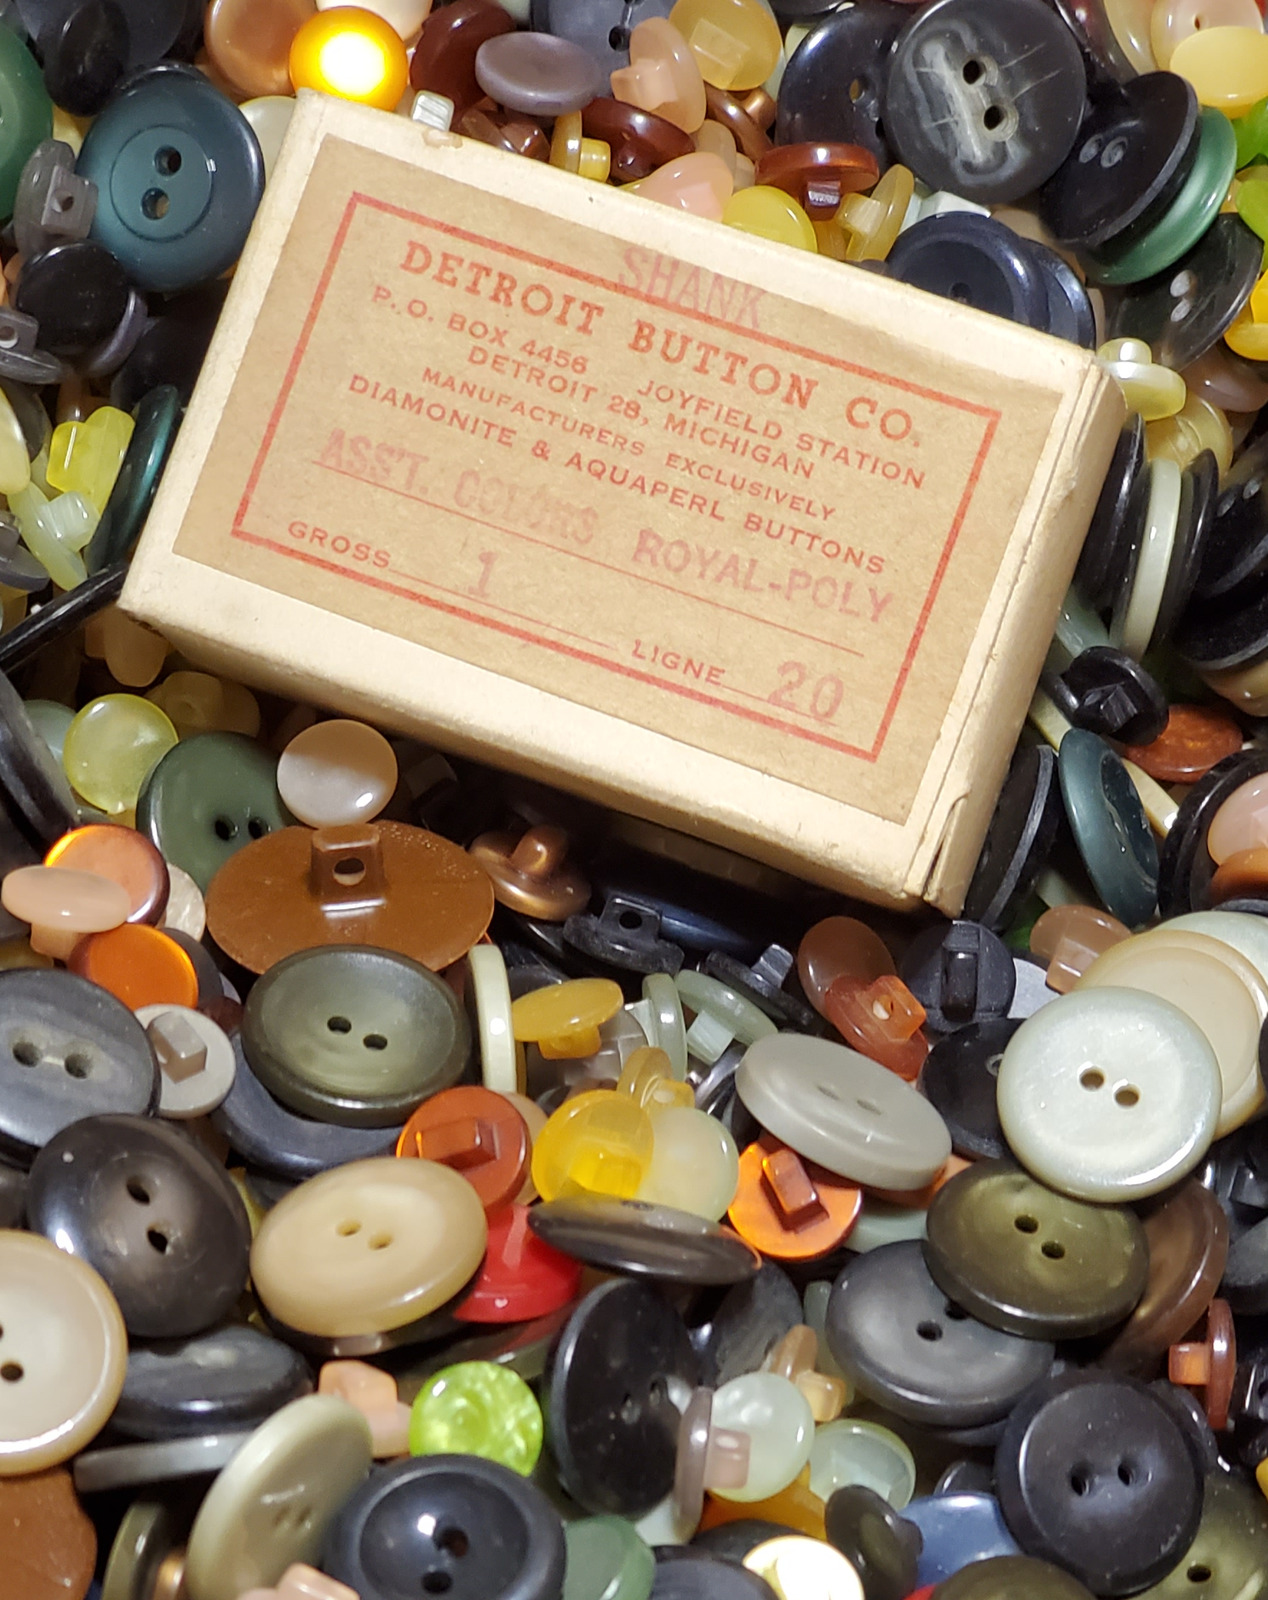 1 Pound Lbs of Vintage 50s era Buttons Detroit Button Co Crafts Mixed Lots Colo